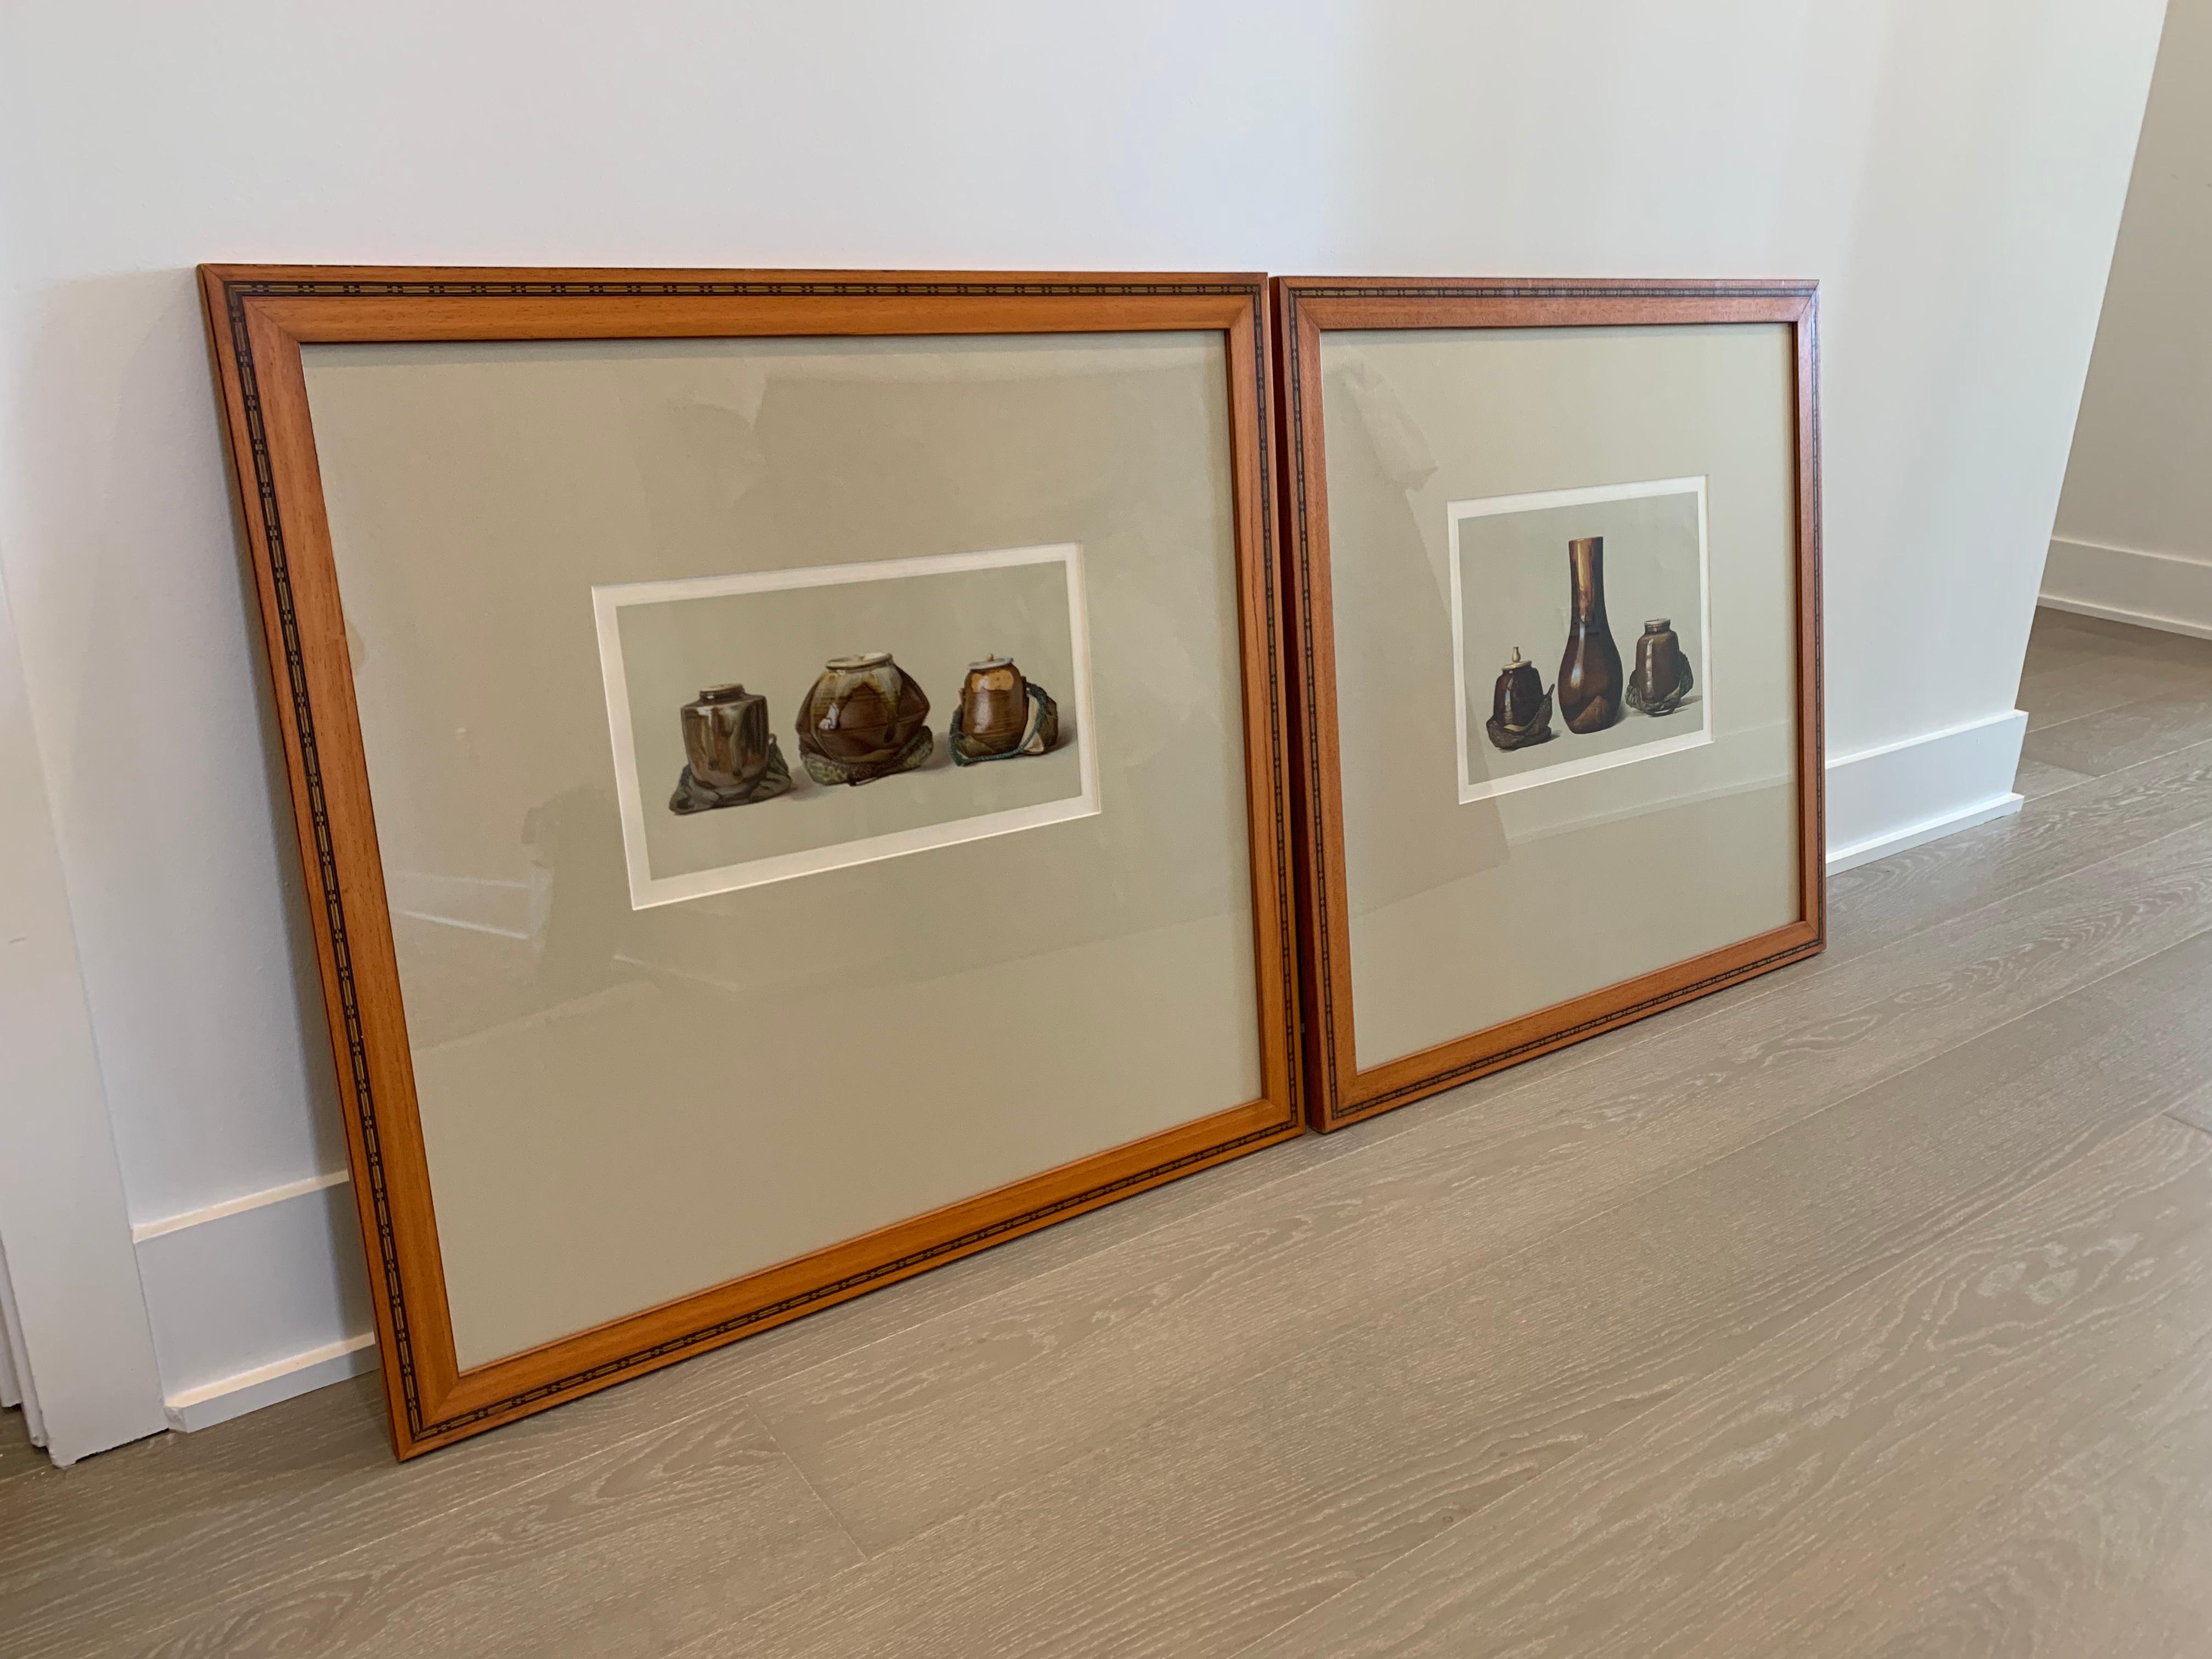 Two framed color lithographs by Louis Prang
Colors are neutral and subject matter is of oriental ceramic art, illustration from the collection of W.T Walters.